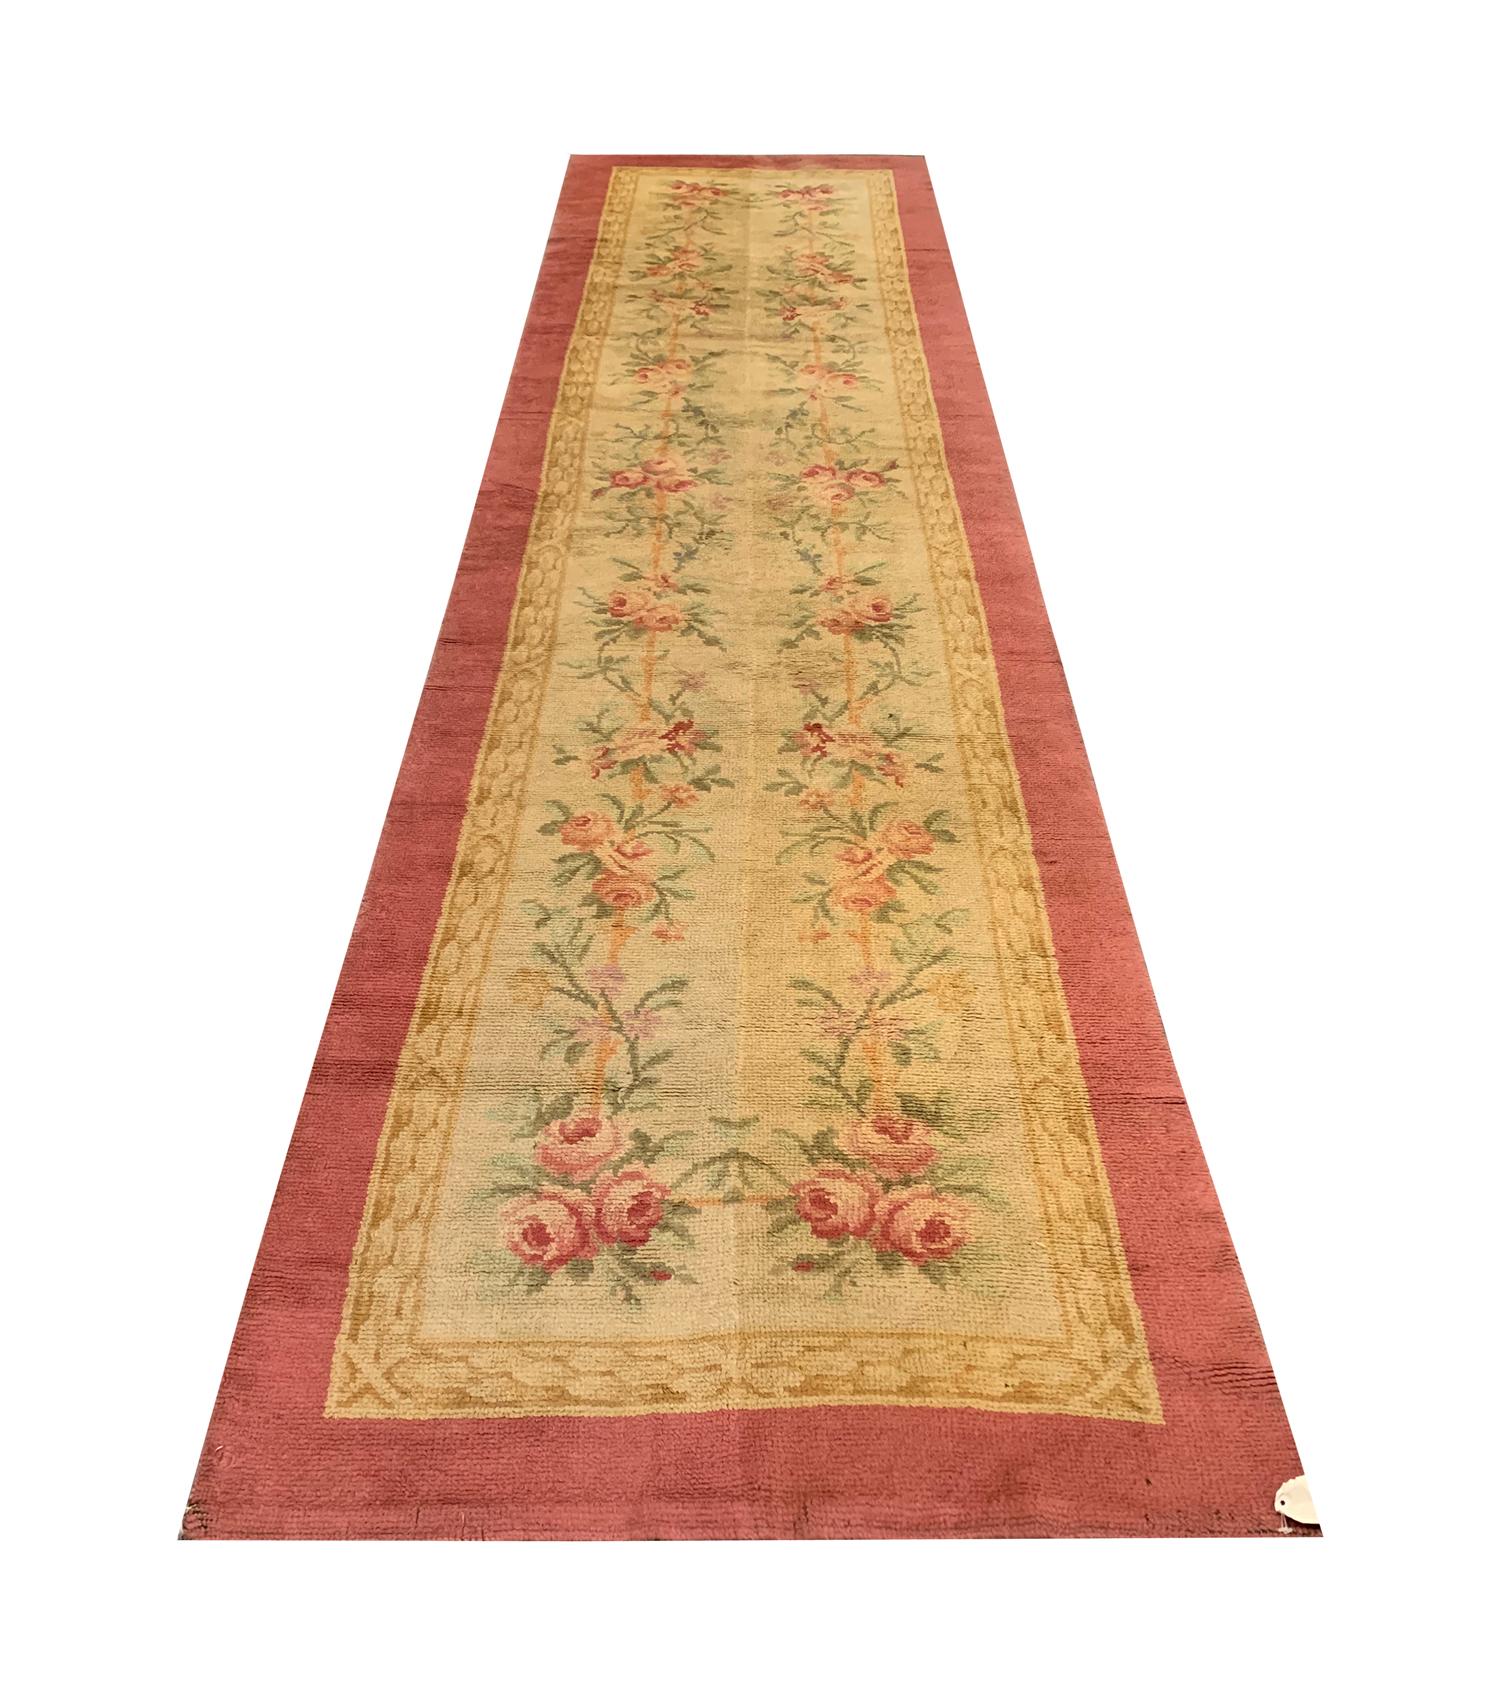 This fine wool runner rug is an antique Savonnerie. Woven by hand in the French Savonnerie manufacturer, prestigious European rug manufacturers, with only the finest materials. The design features an elegant scrolling flower design woven in accents